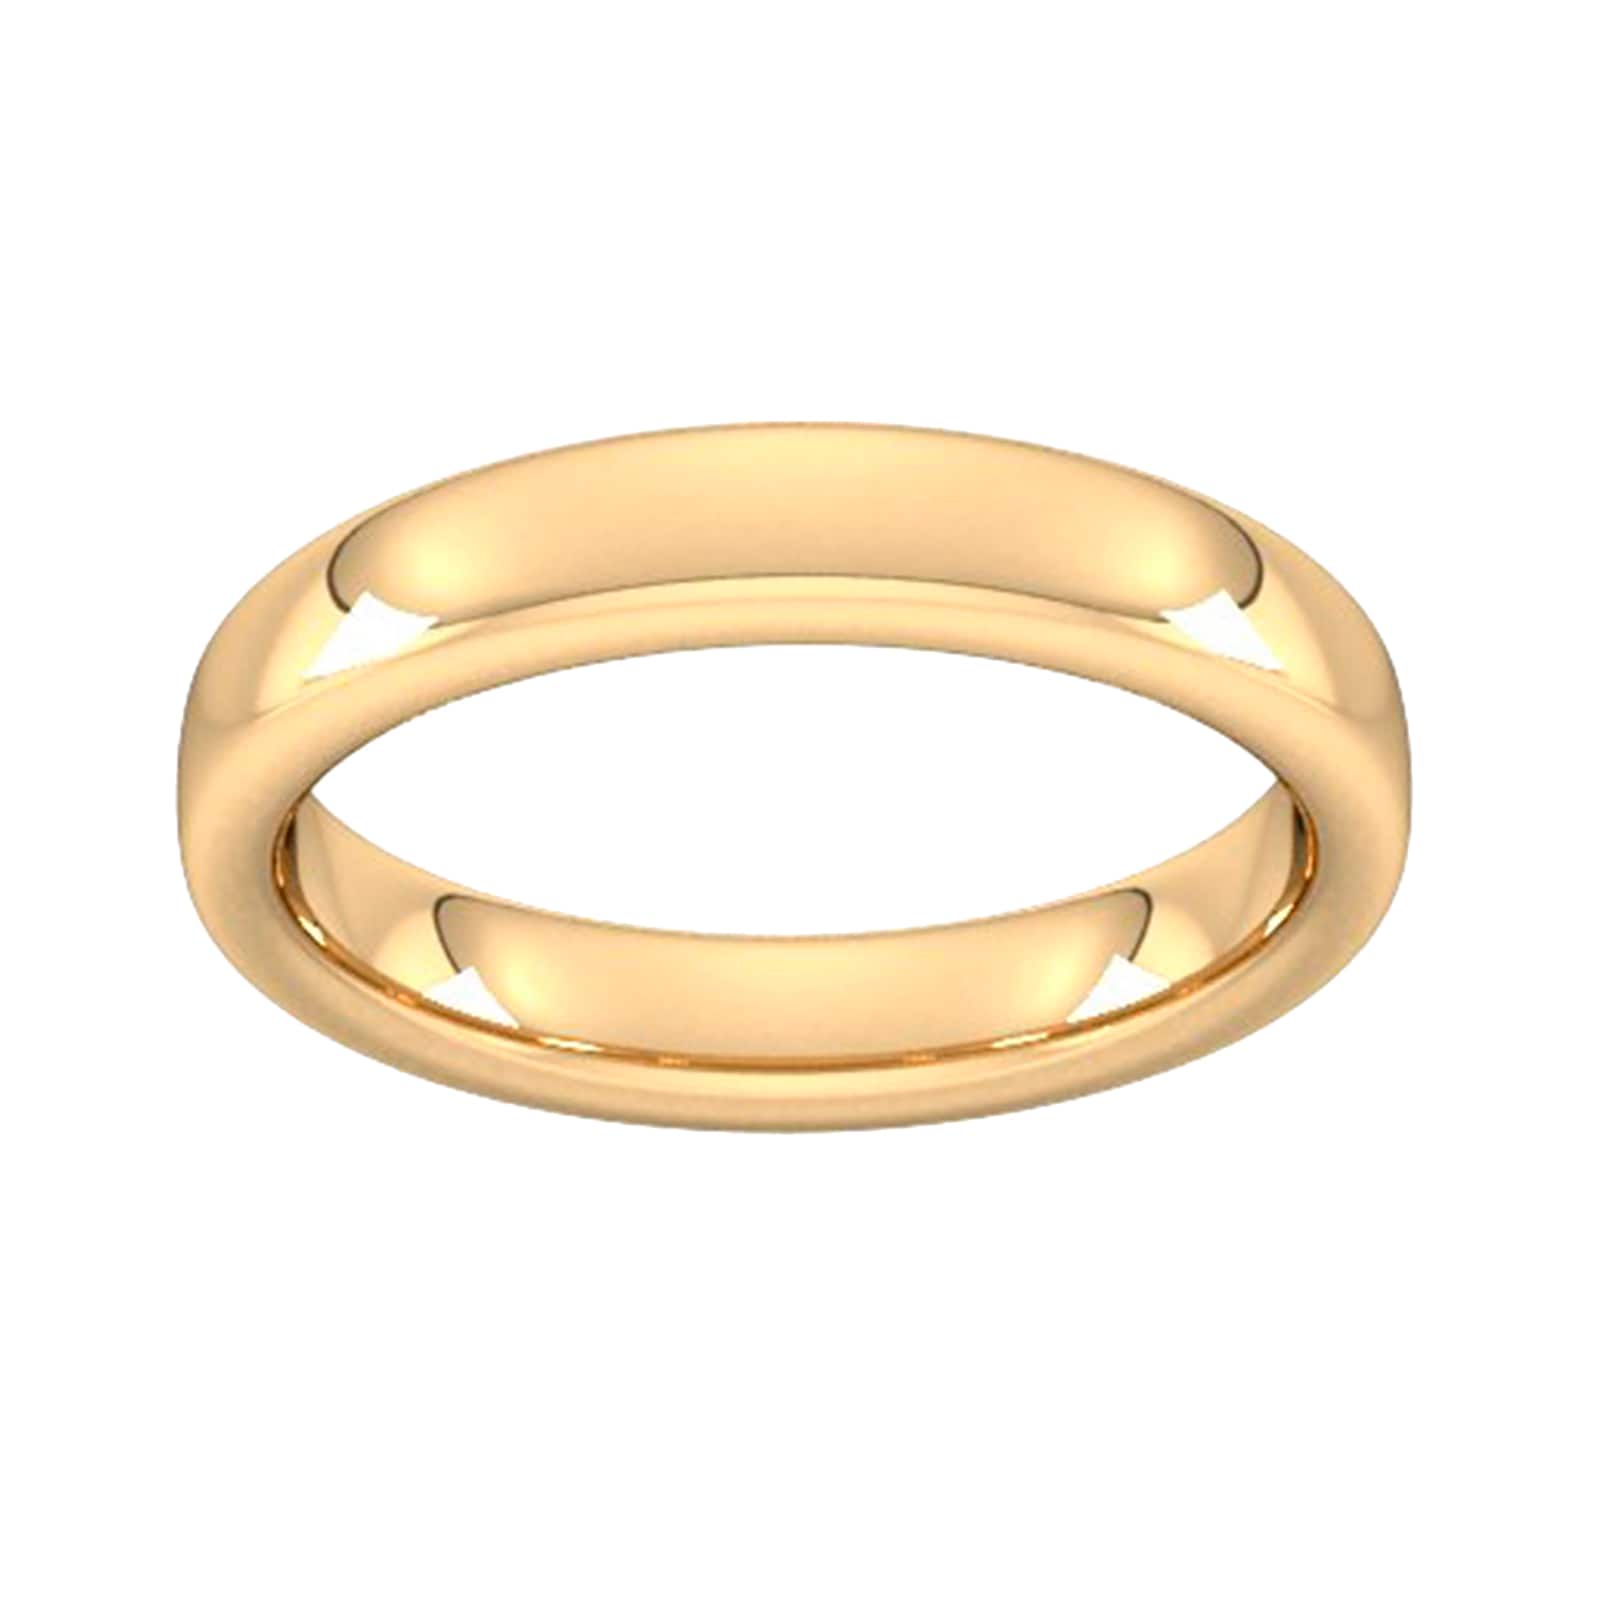 4mm Slight Court Extra Heavy Wedding Ring In 9 Carat Yellow Gold - Ring Size Z